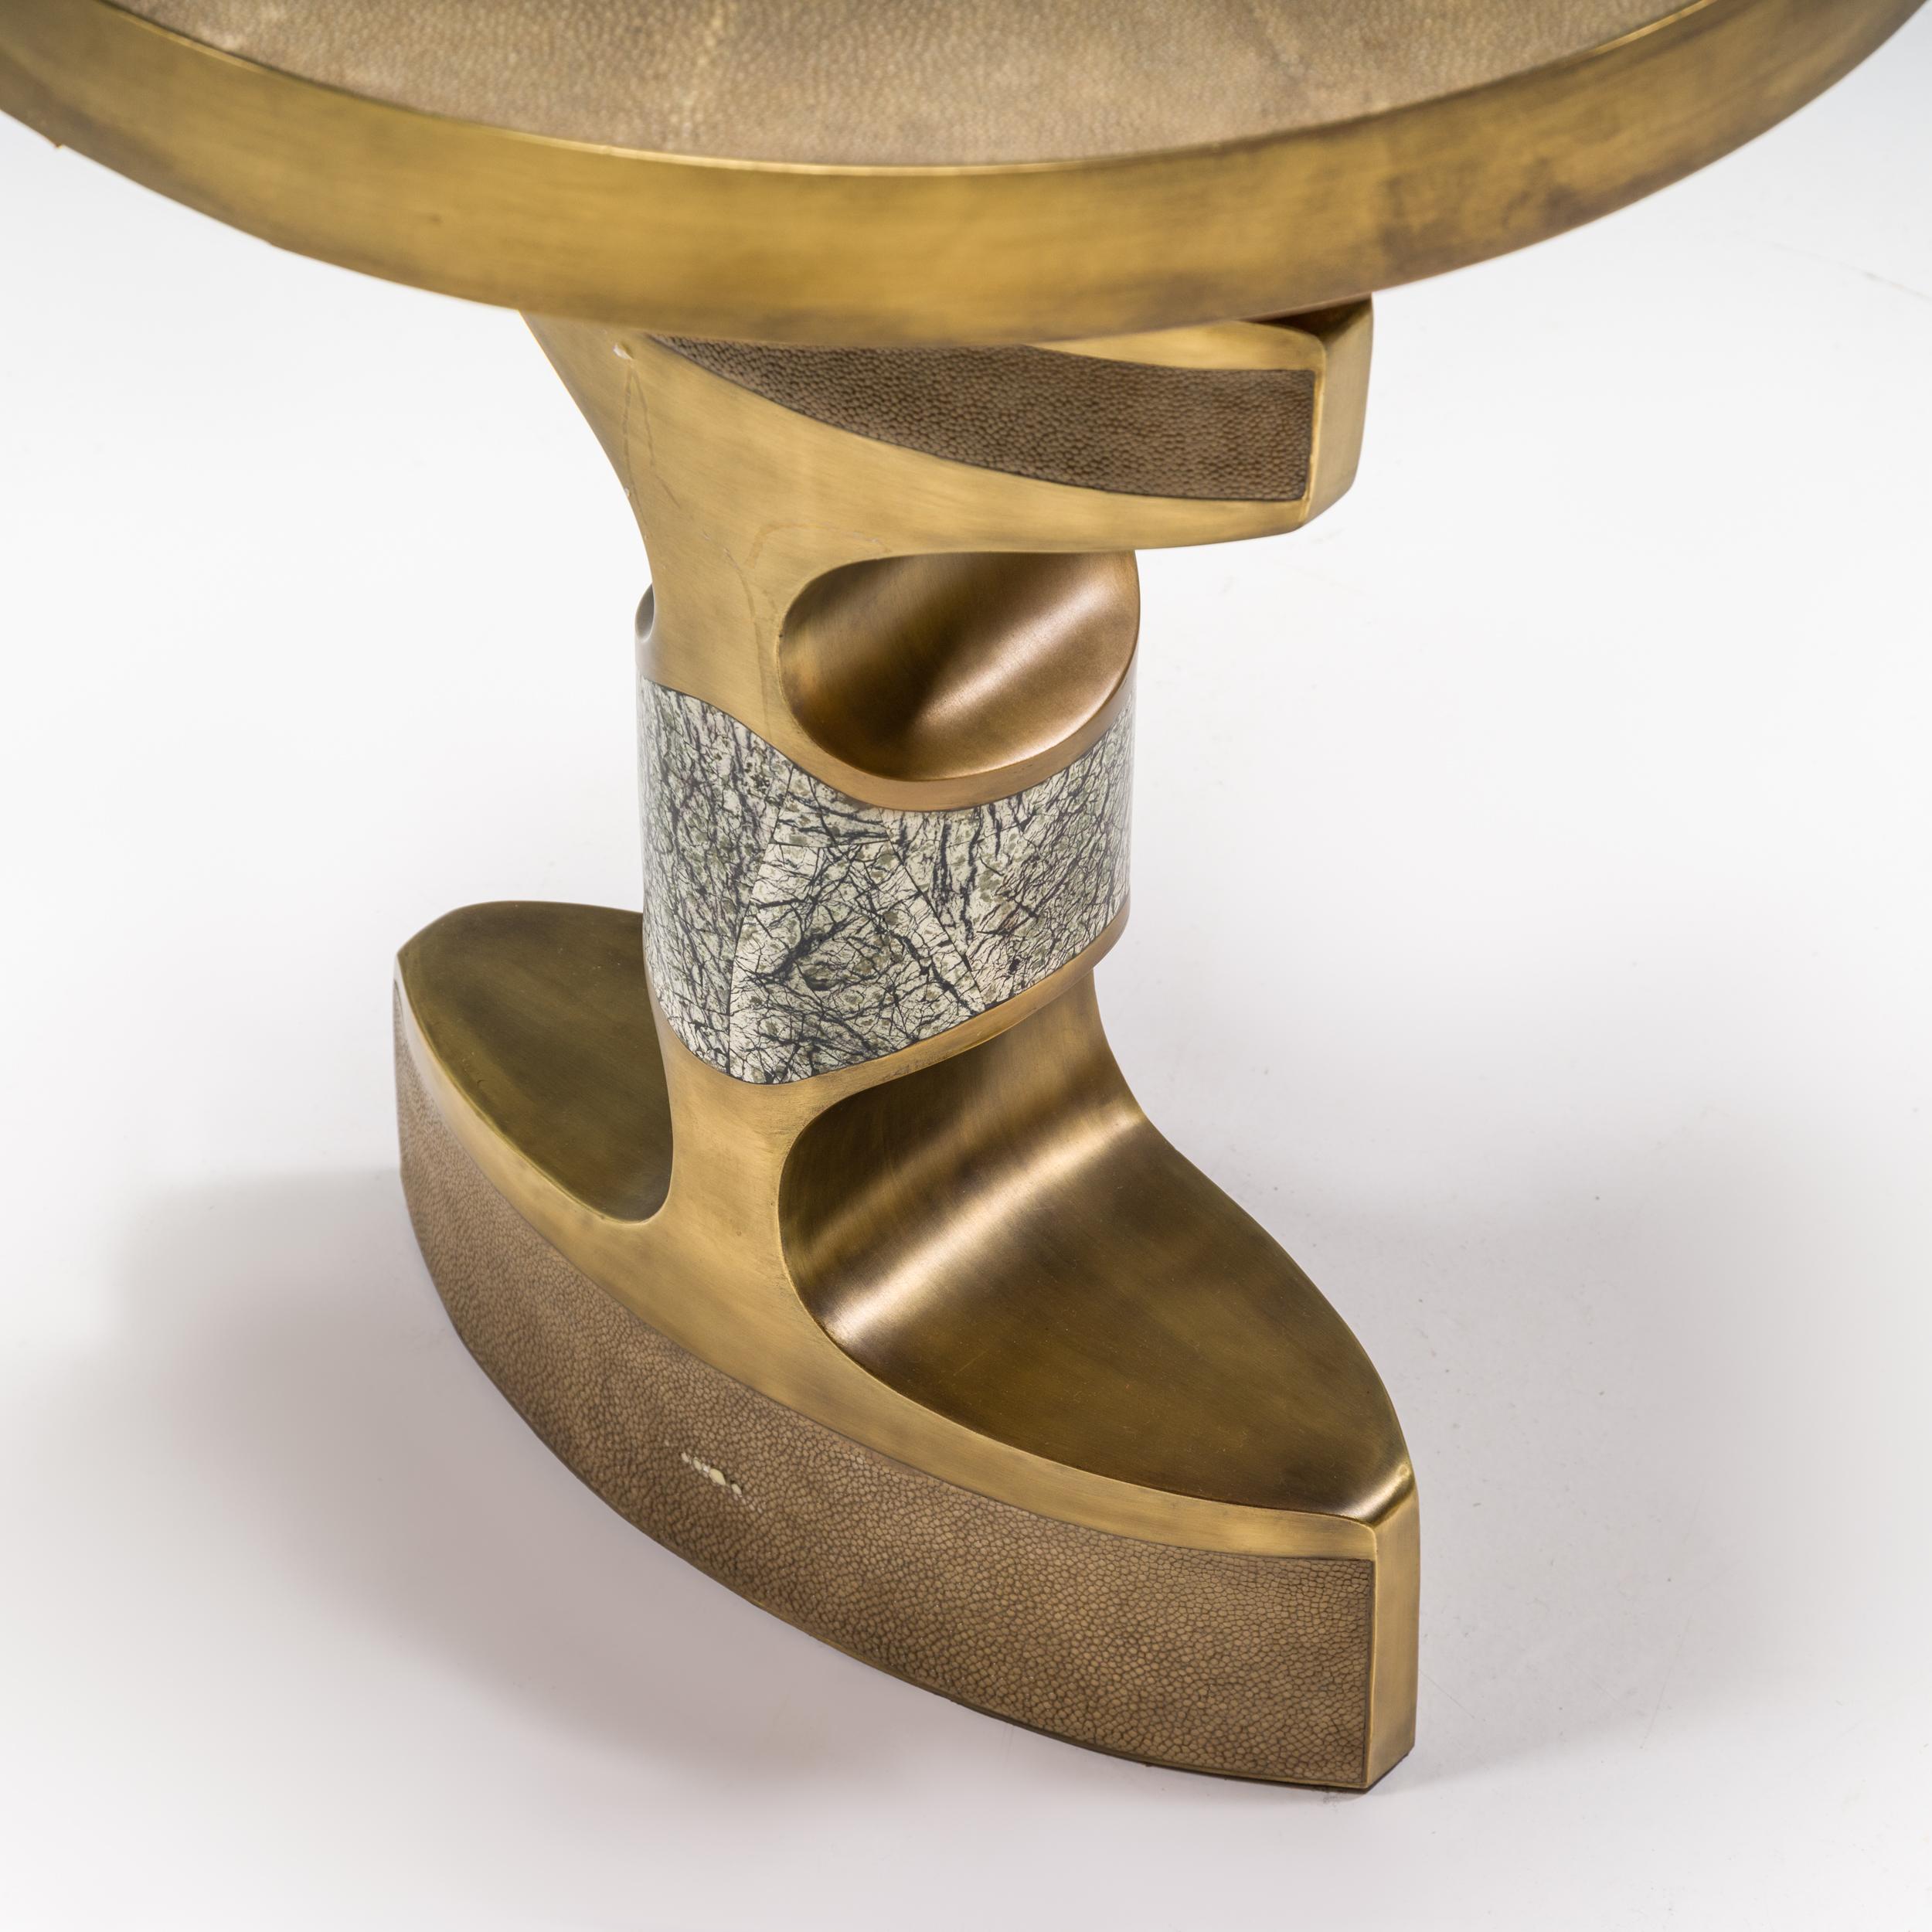 Philippine R & Y AUGOUSTI Shagreen and Baguio Green Stone Carmen Side Table